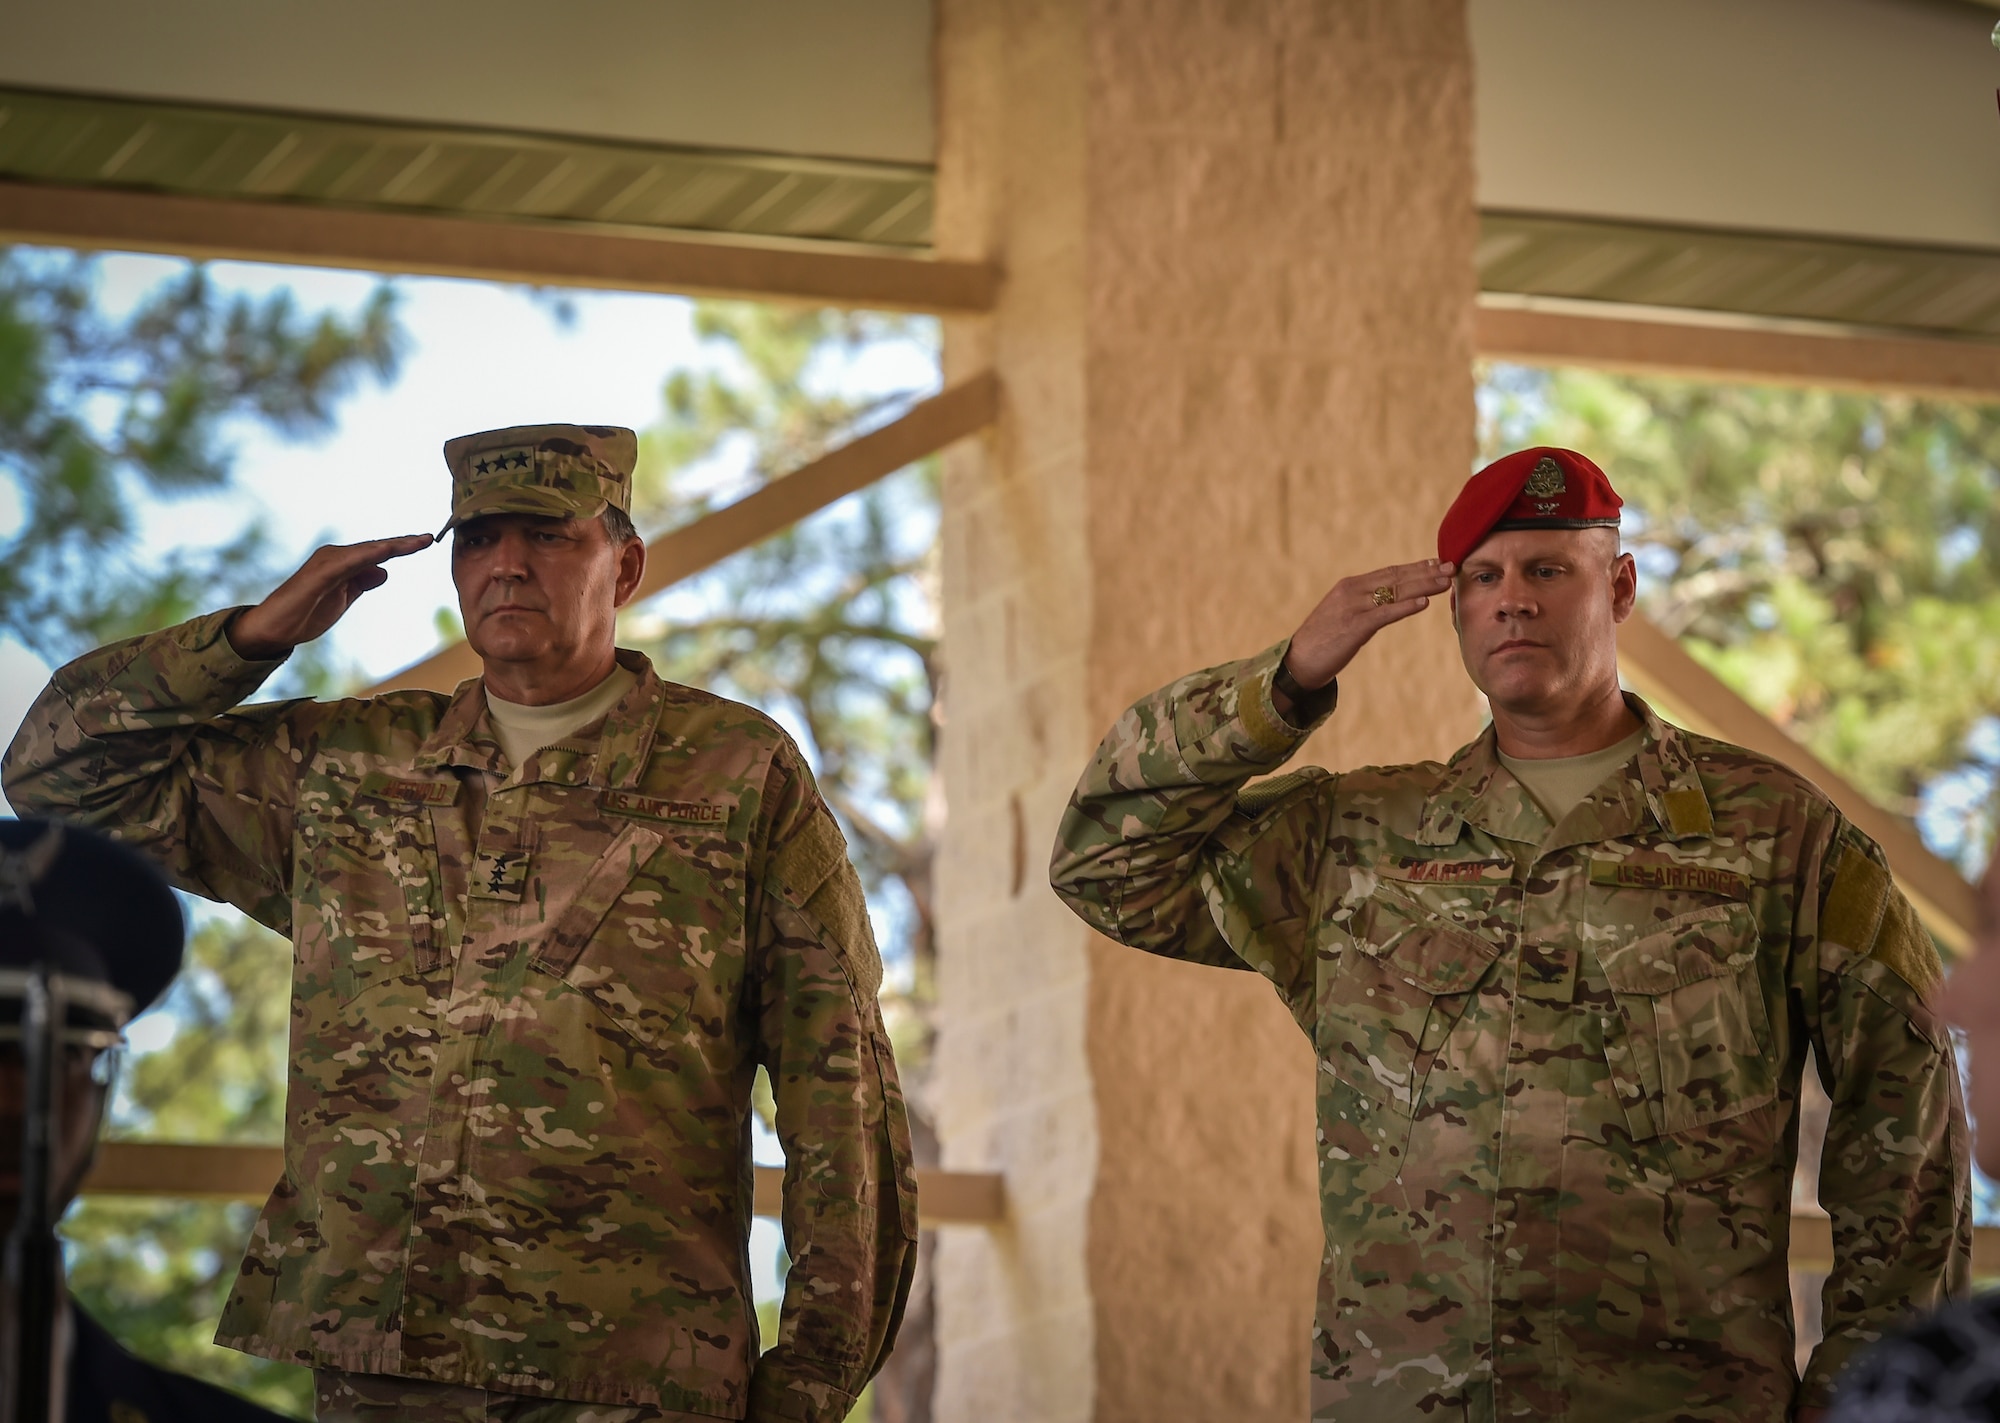 Lt. Gen. Brad Heithold, commander of Air Force Special Operations Command, and Col. Michael Martin, commander of the 24th Special Operations Wing, render a salute during the national anthem at the 24th SOW assumption of command at Hurlburt Field, Fla., July 14, 2016. Heithold presided over the assumption of command, where Martin took command of the sole Special Tactics wing in the Air Force. (U.S. Air Force photo by Senior Airman Ryan Conroy) 